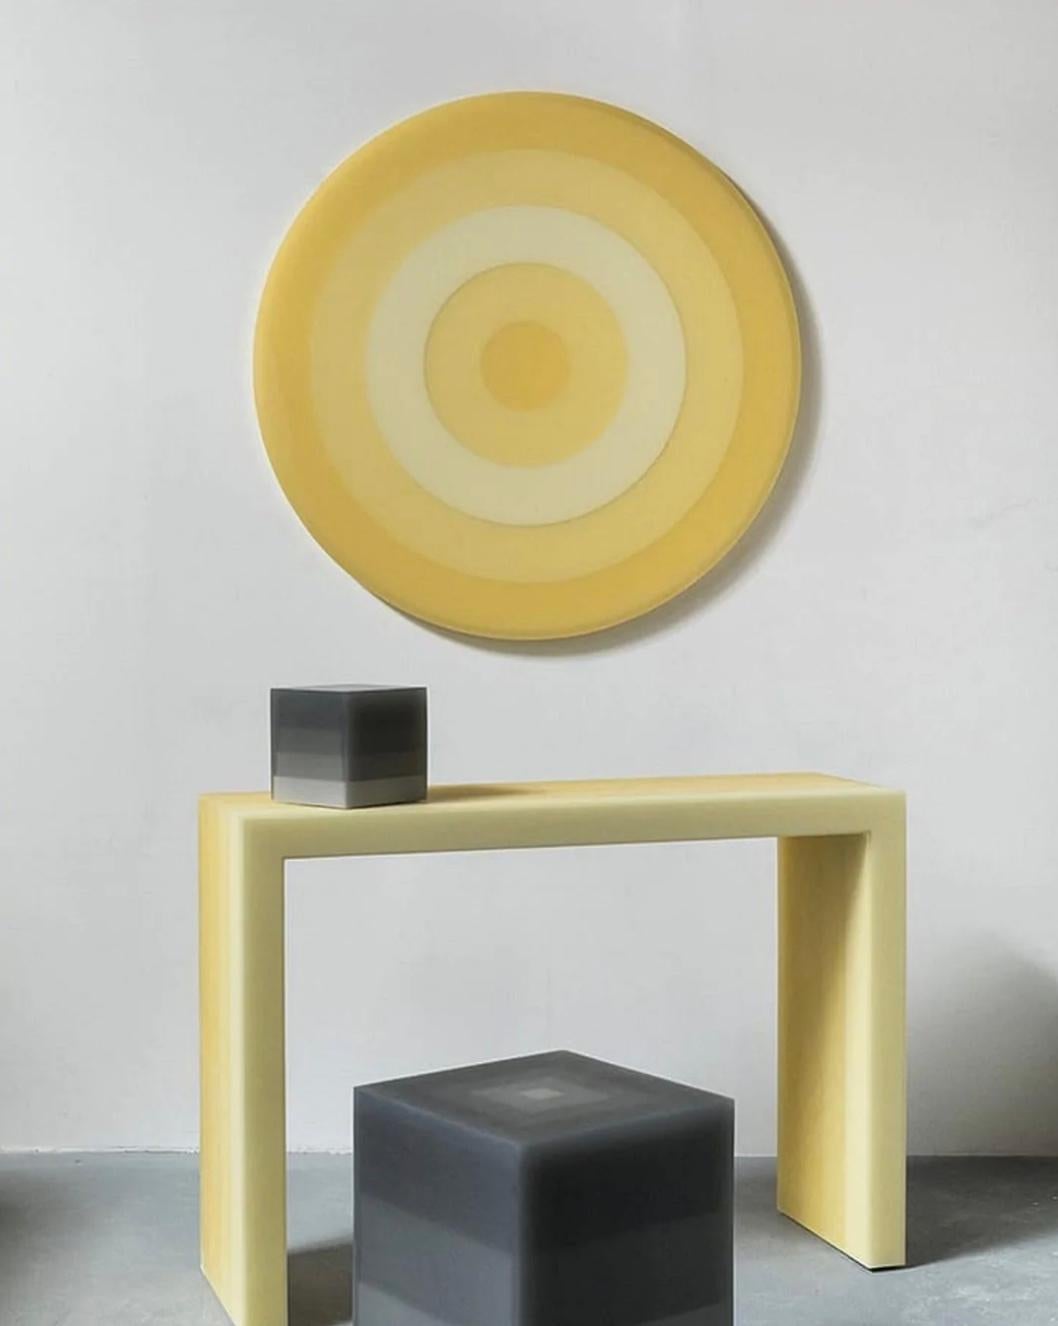 Scale Rings Resin Wall Decor Yellow by Facture, Represented by Tuleste Factory In New Condition For Sale In New York, NY